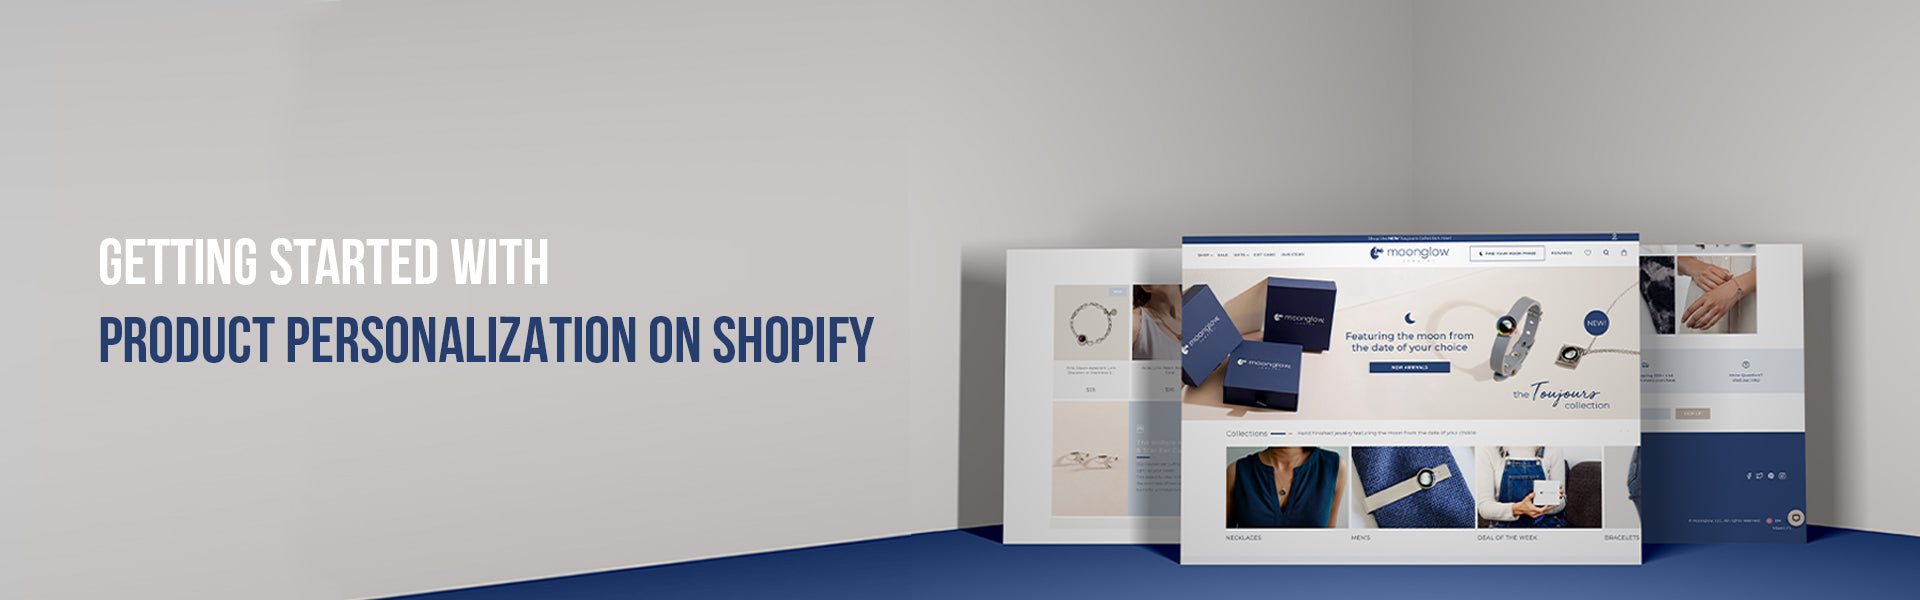 Getting Started with Product Personalization on Shopify